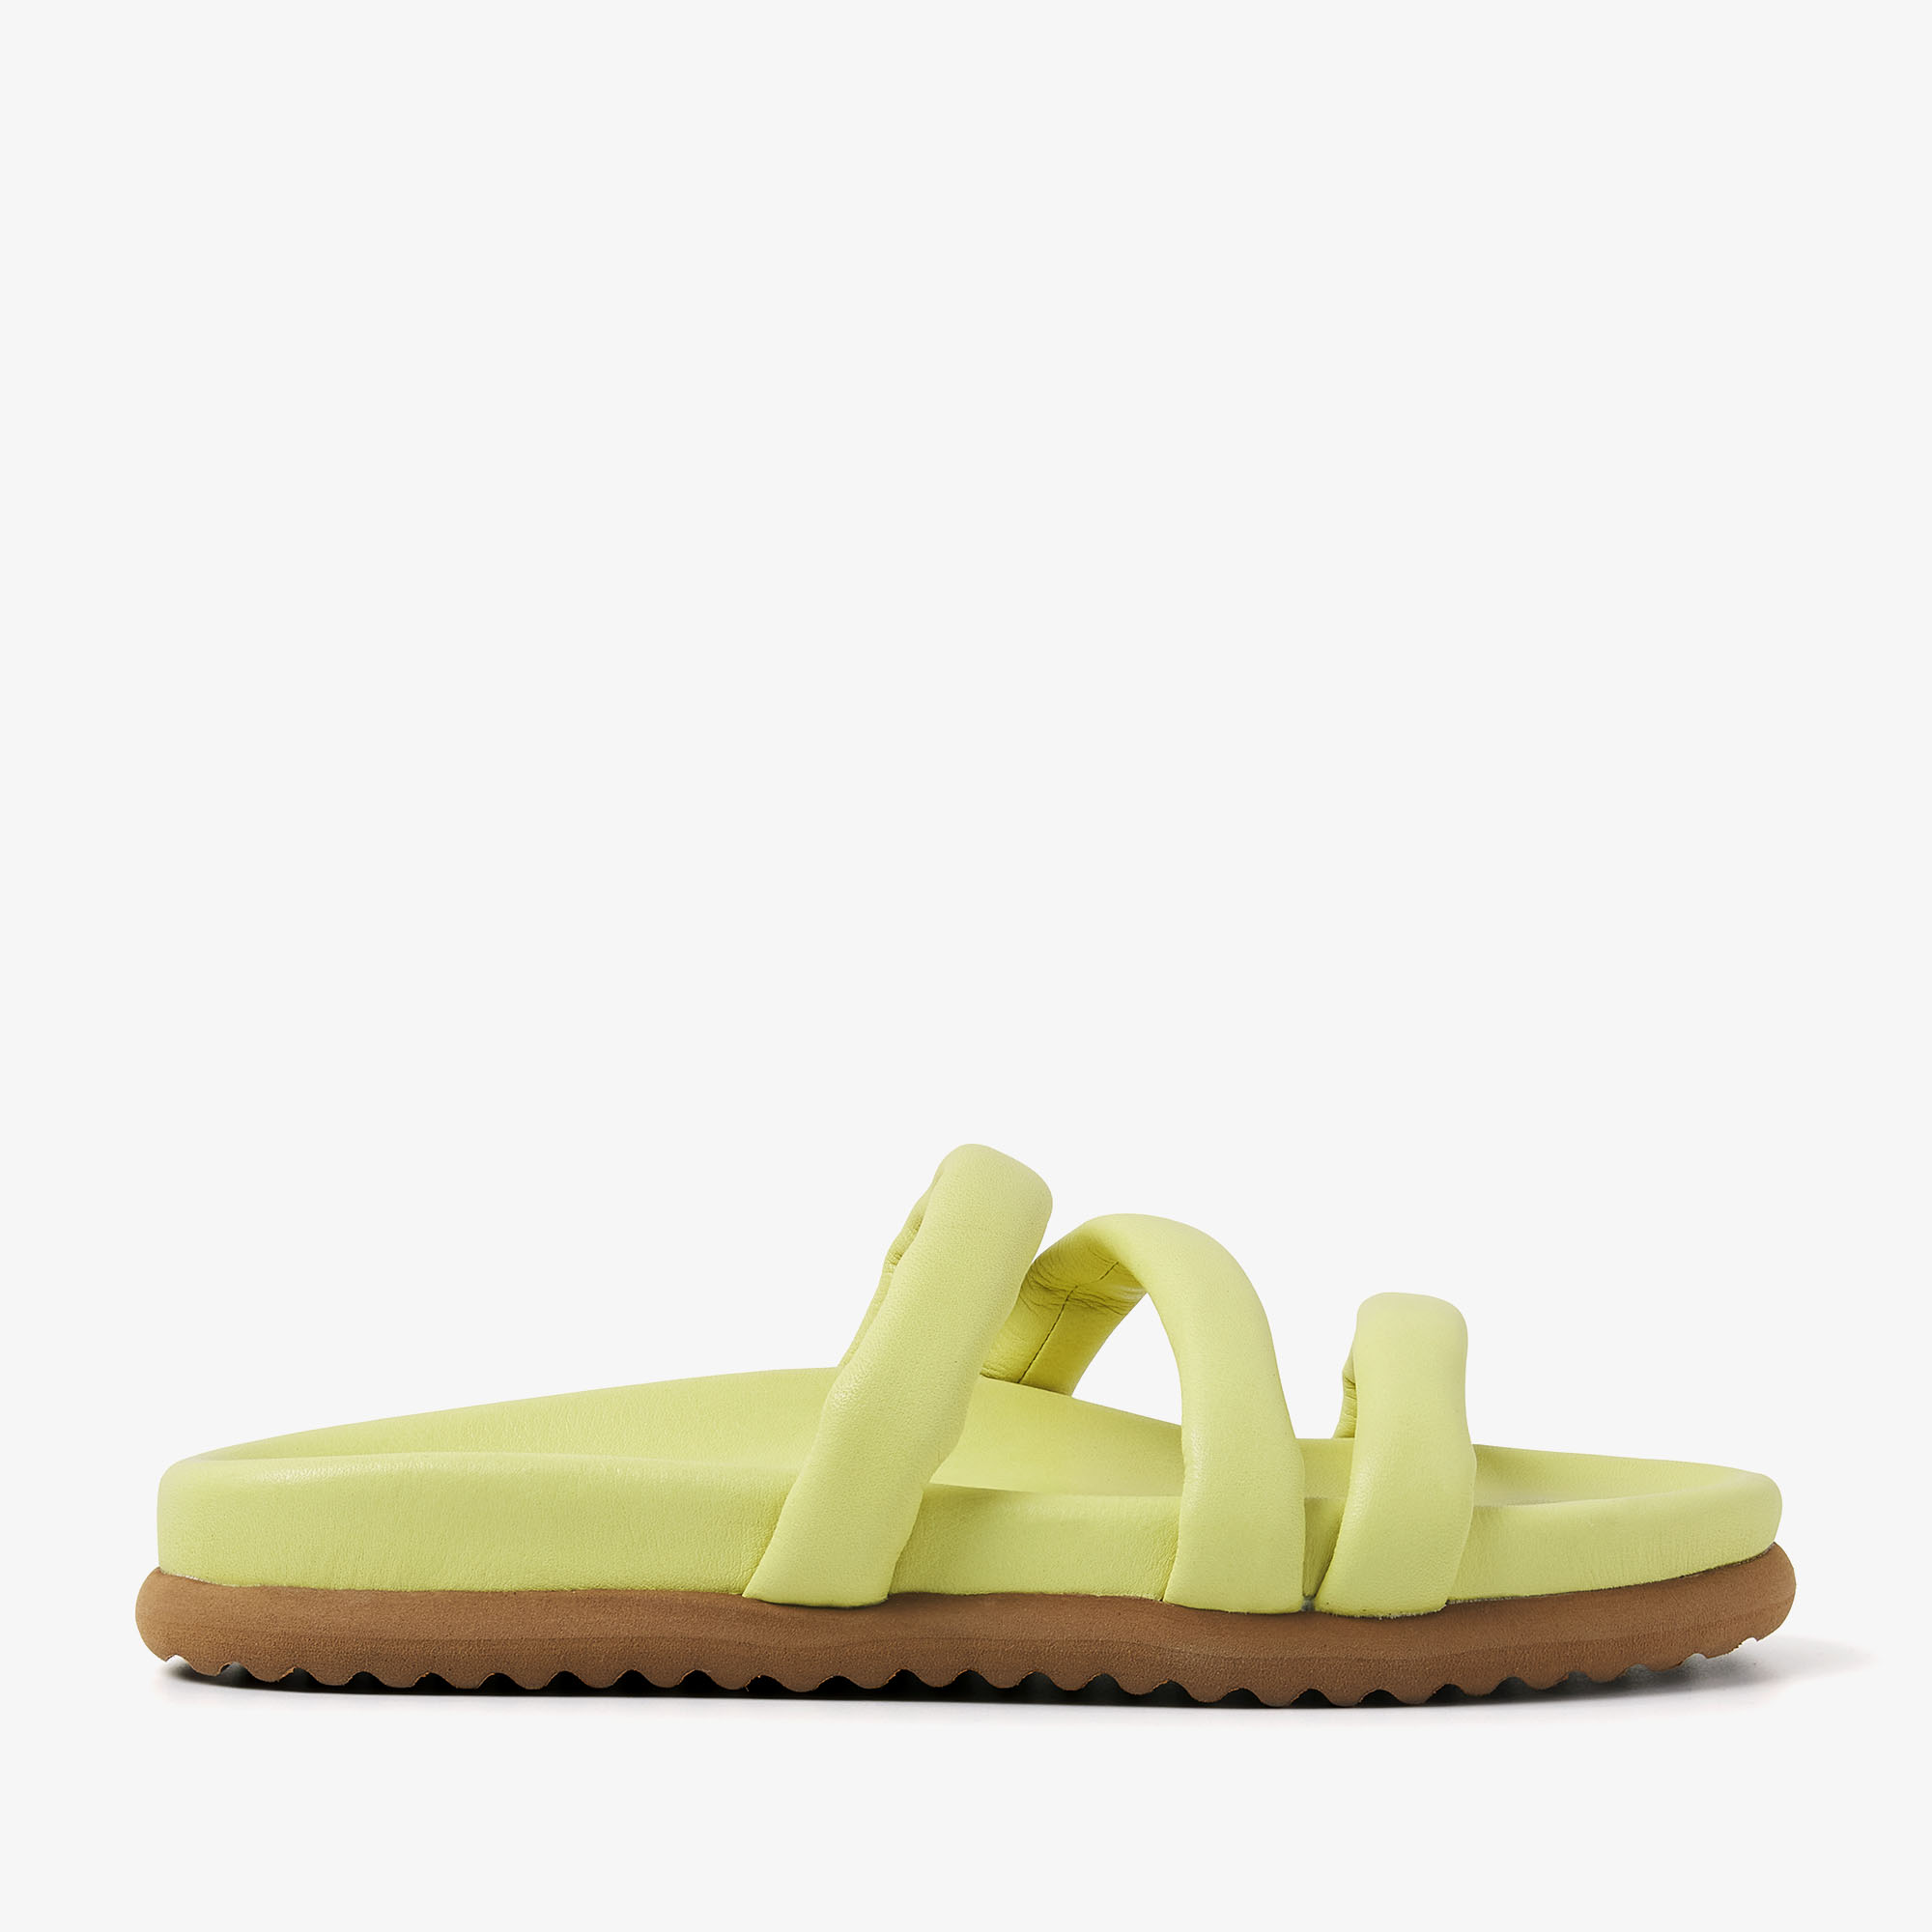 VIA VAI Candy Pop yellow slippers